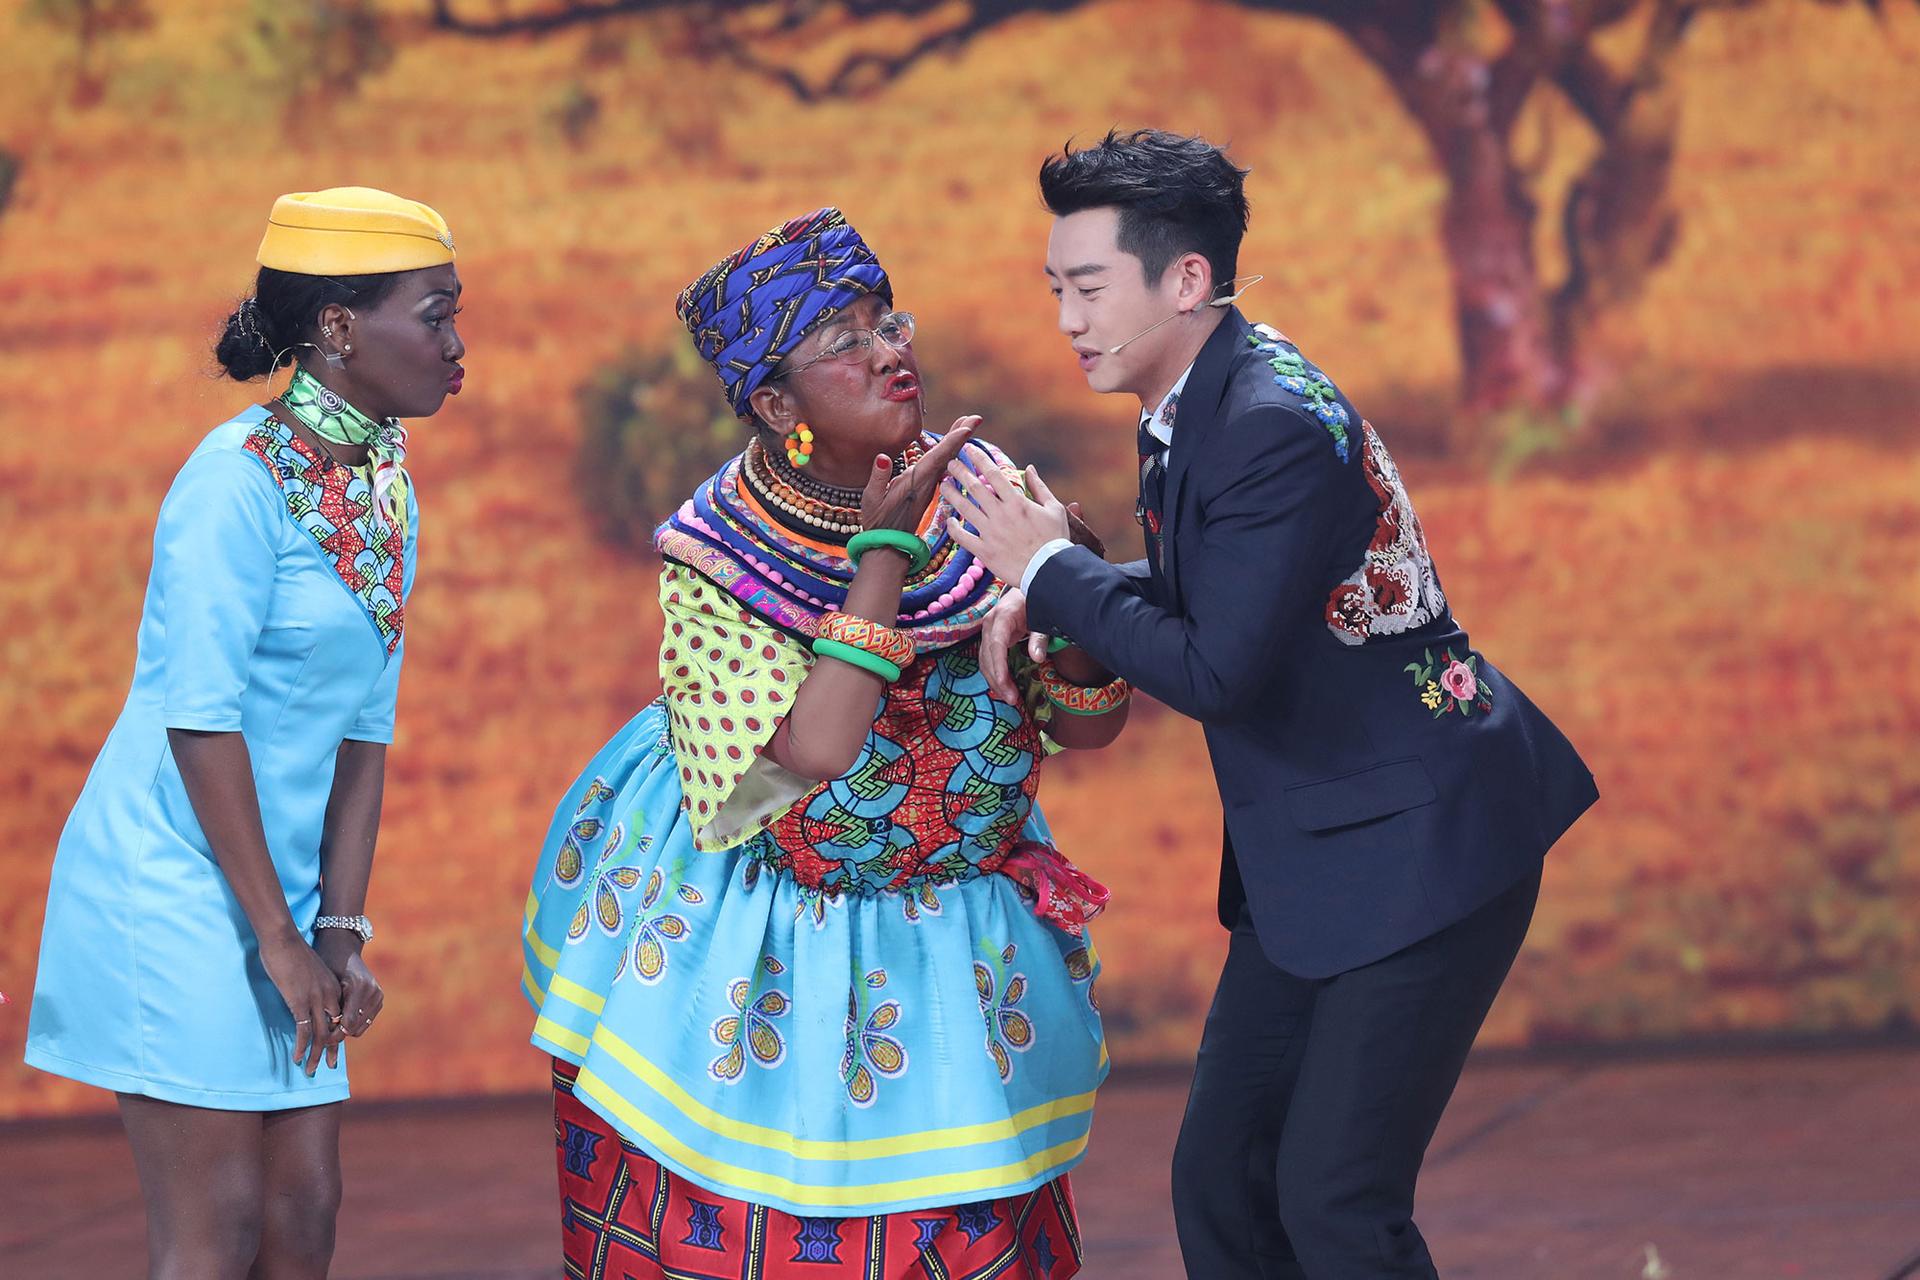 Chinese actor Lou Naiming is shown performs a skit wearing blackface and a colorful dress.